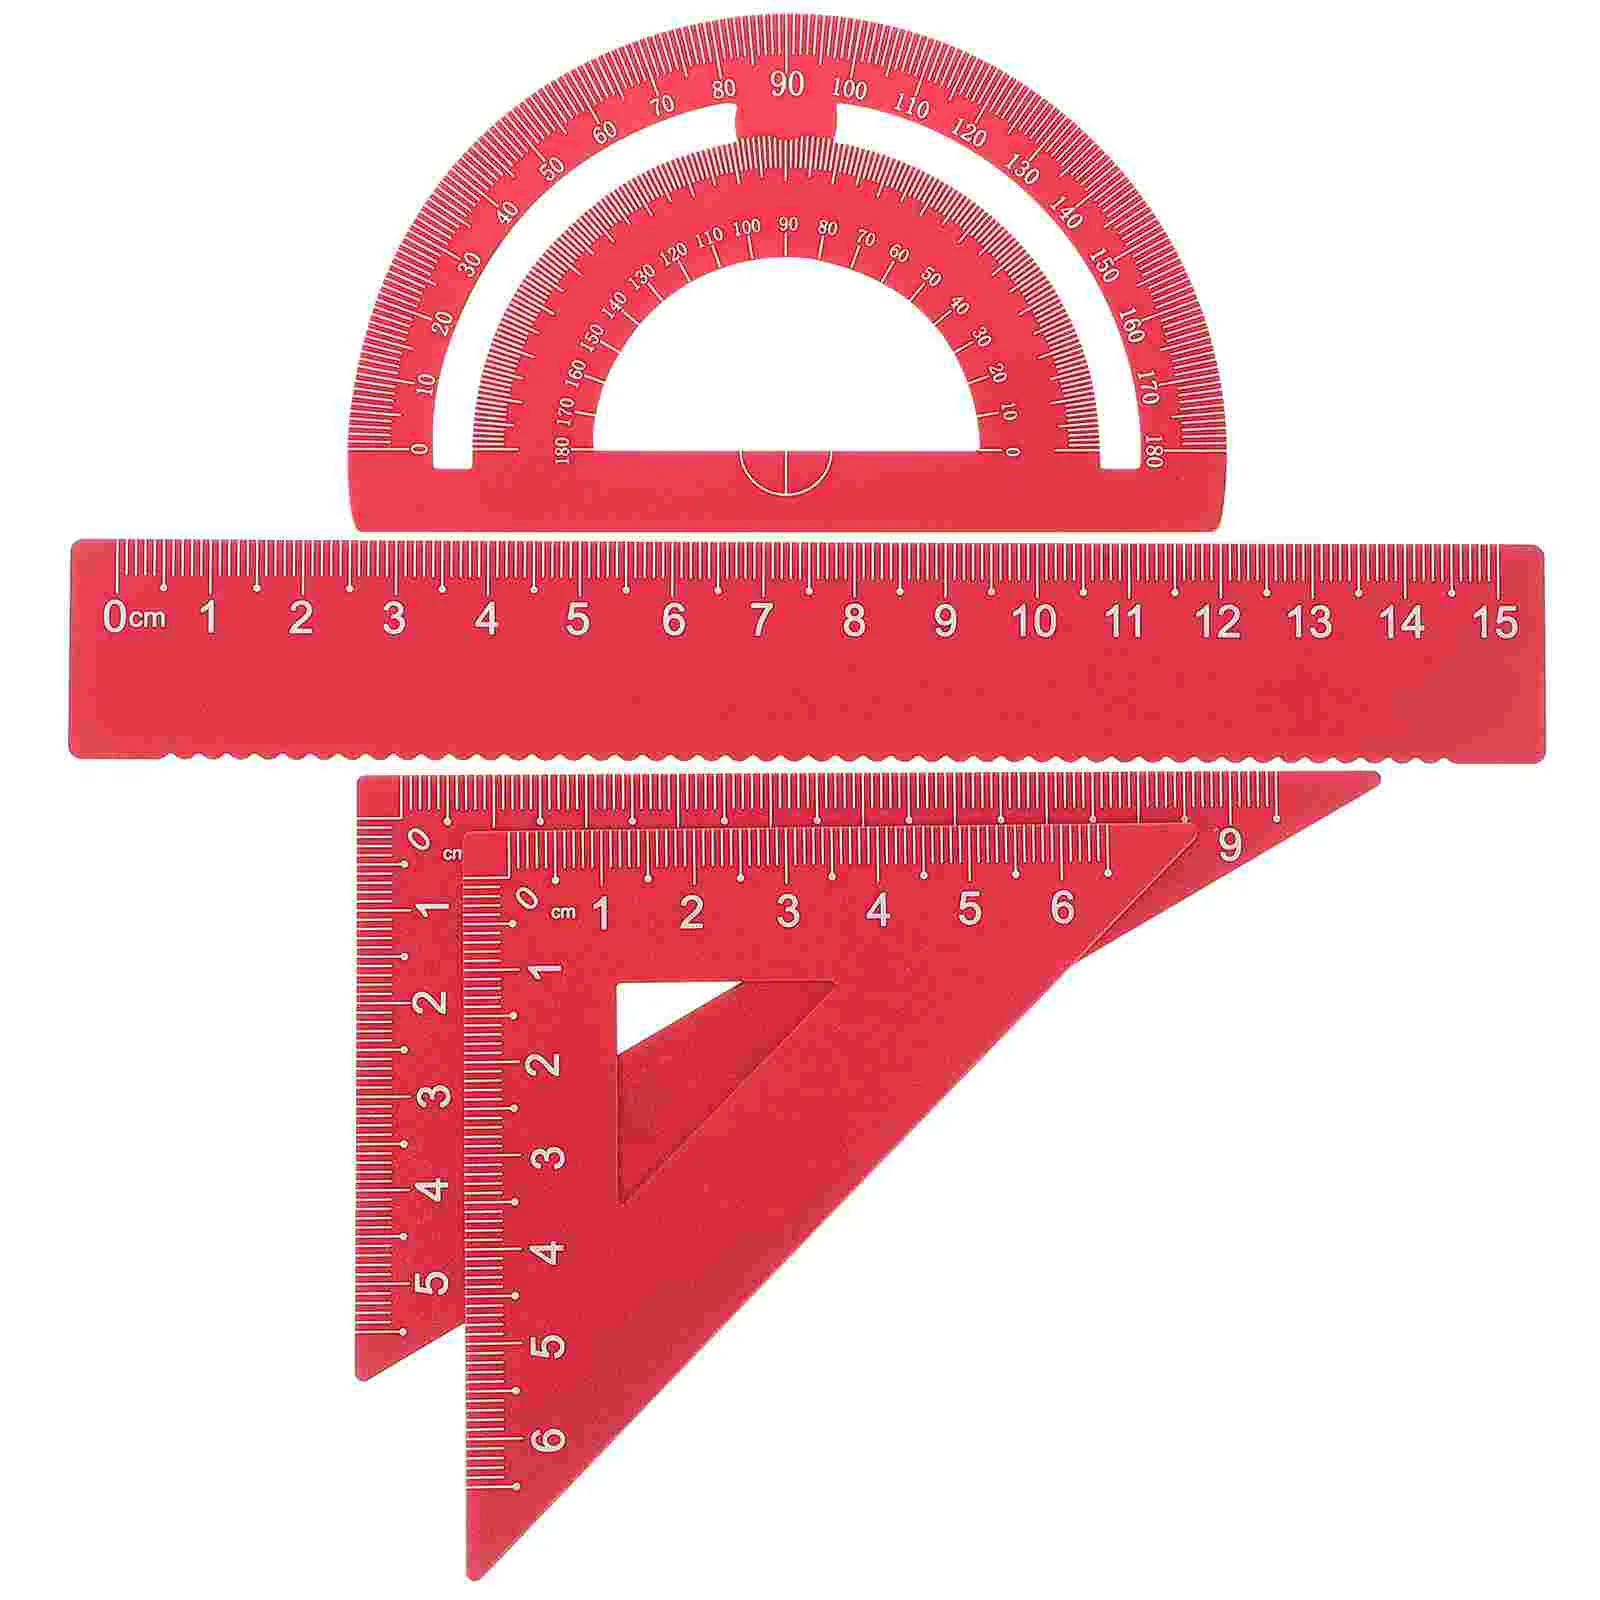 

Ruler Set Geometry Protractor Triangle Scale Metal Math Drafting Tools Aluminum Measuring Rulers Stationery Metric Drawing